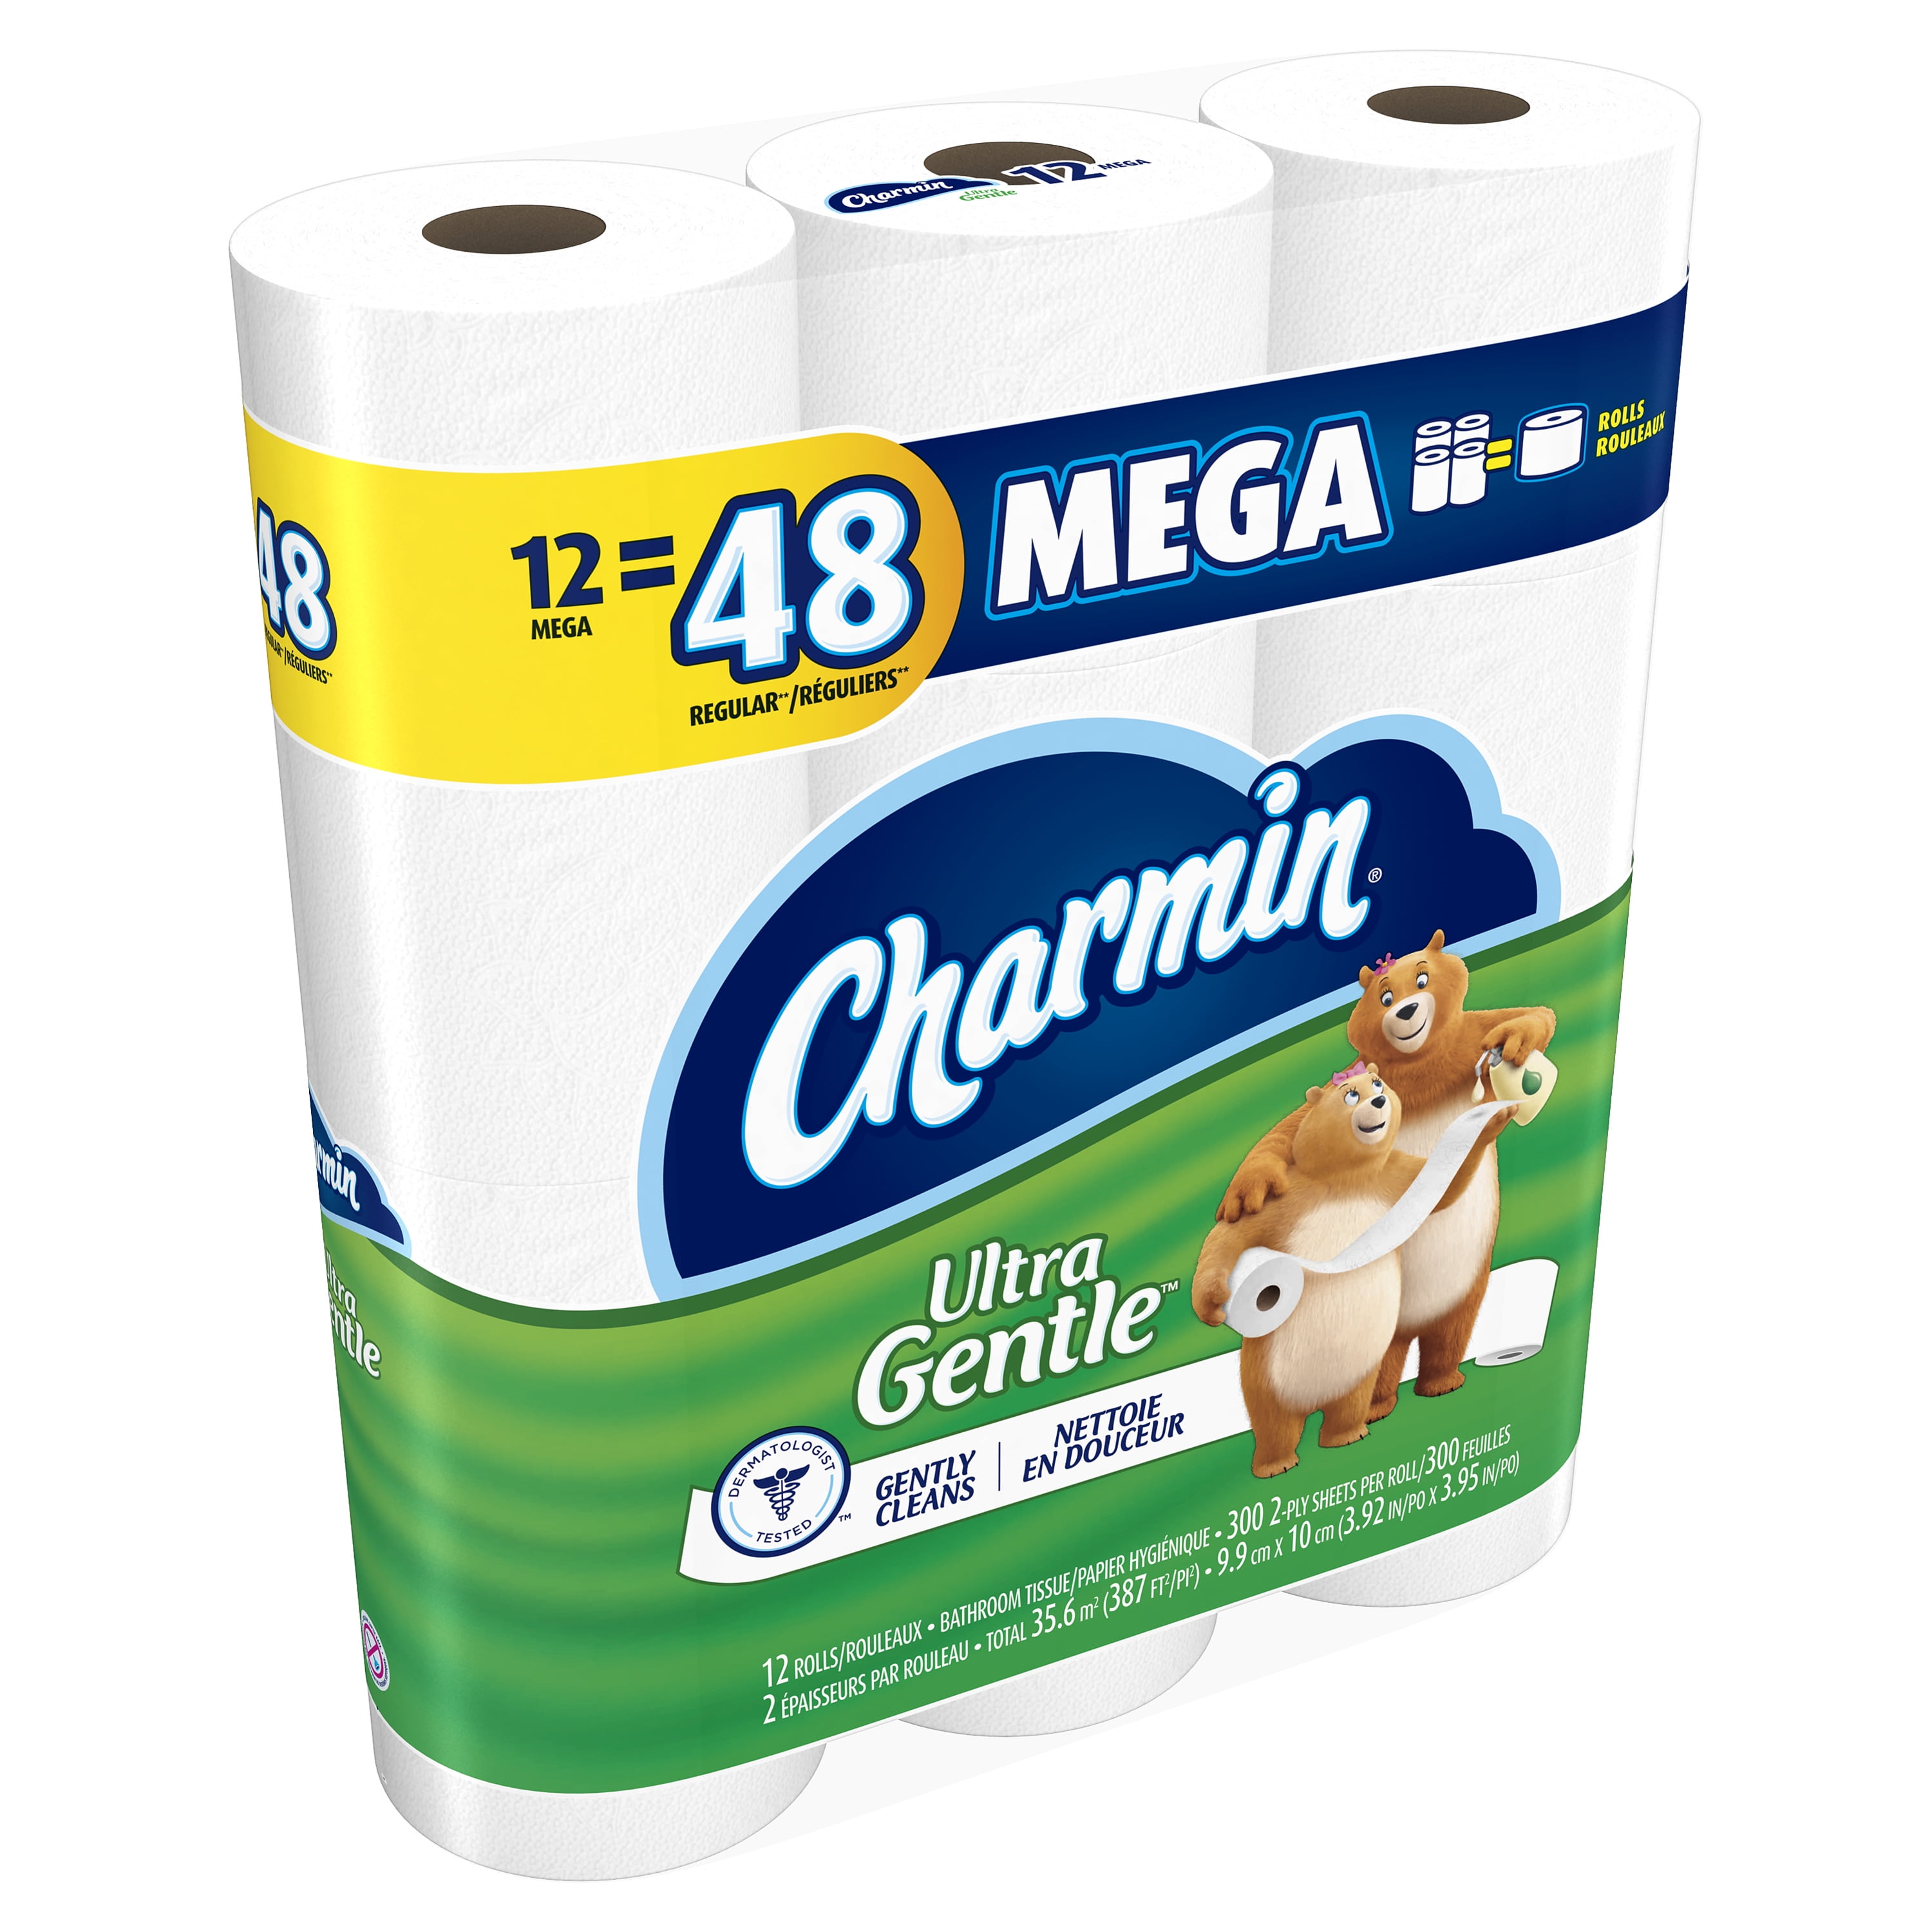 4 Layers Dissolvable Toilet Paper Ultra Strong Toilet Paper for Camping Marine Professional Bulk Toilet Paper with Individually Wrapped Standard Rolls 12 Rolls Ultra Gentle Care Toilet Paper 